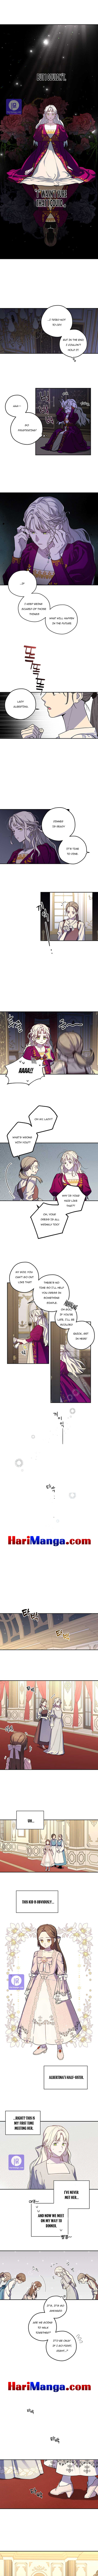 Rose Castle’s Elise (The Elegy of Roses) Chapter 3 - Page 2